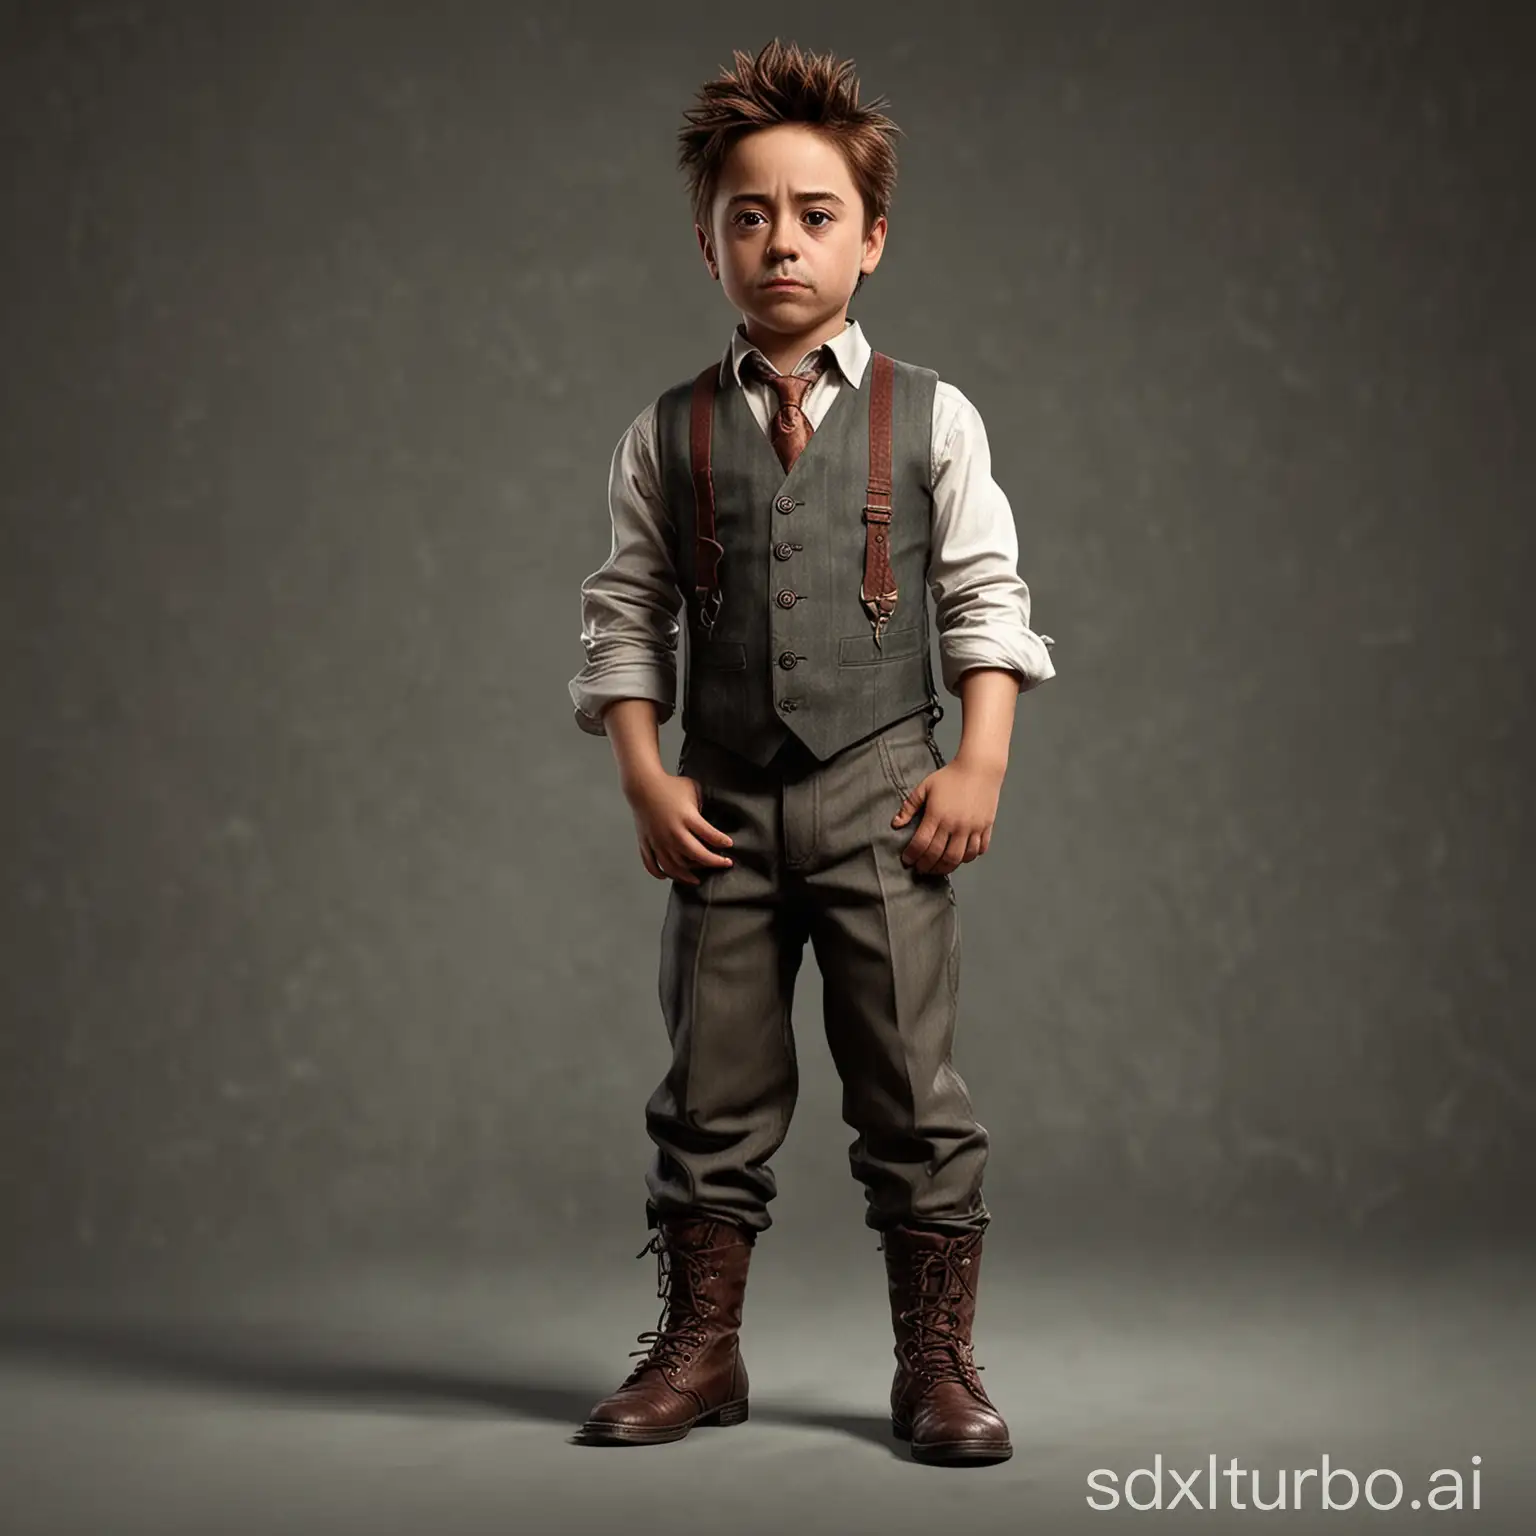 Little child Robert Downey Jr, game character, stands at full height